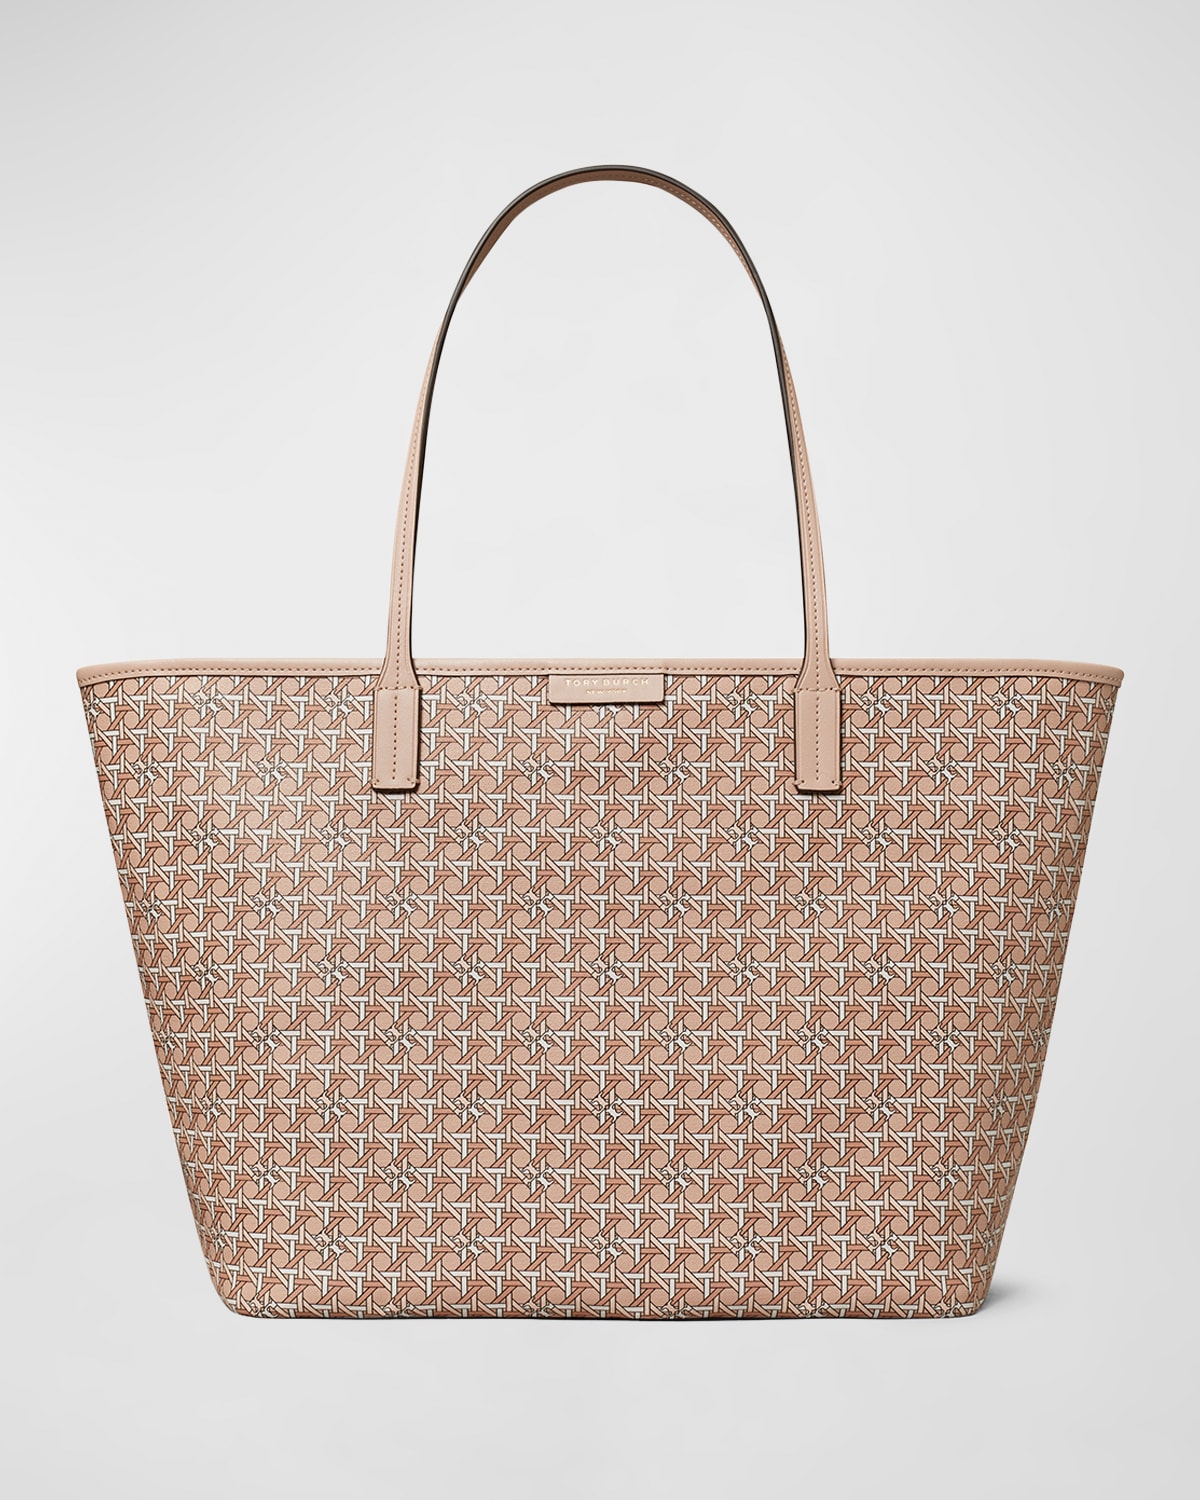 Tory Burch Every-ready Woven Monogram Tote Bag In Winter Peach